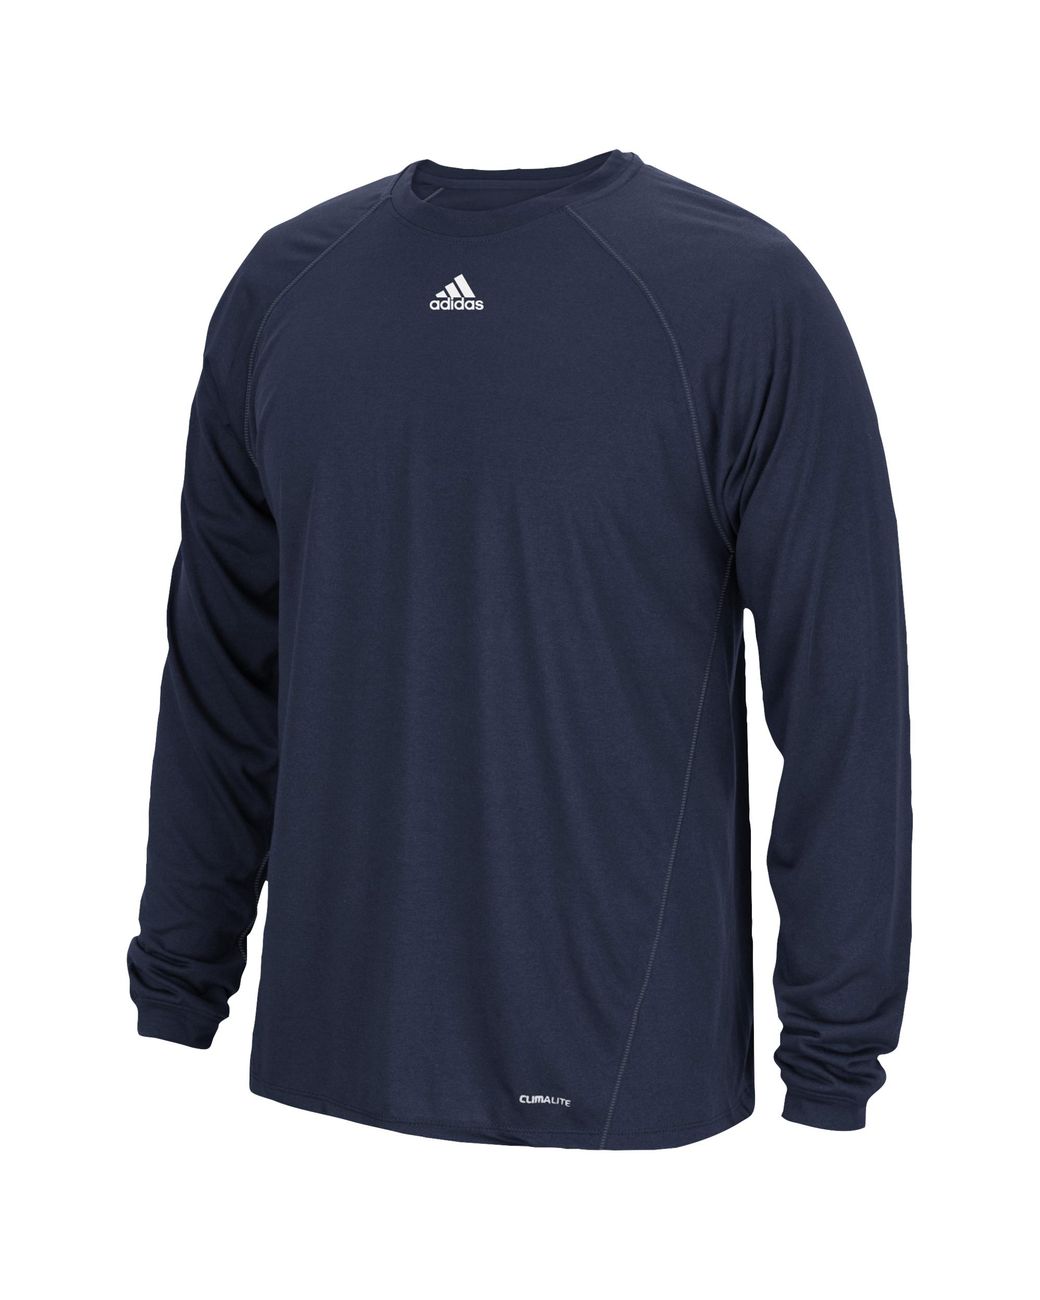 adidas Team Climalite Long Sleeve T-shirt in Blue for Men - Lyst